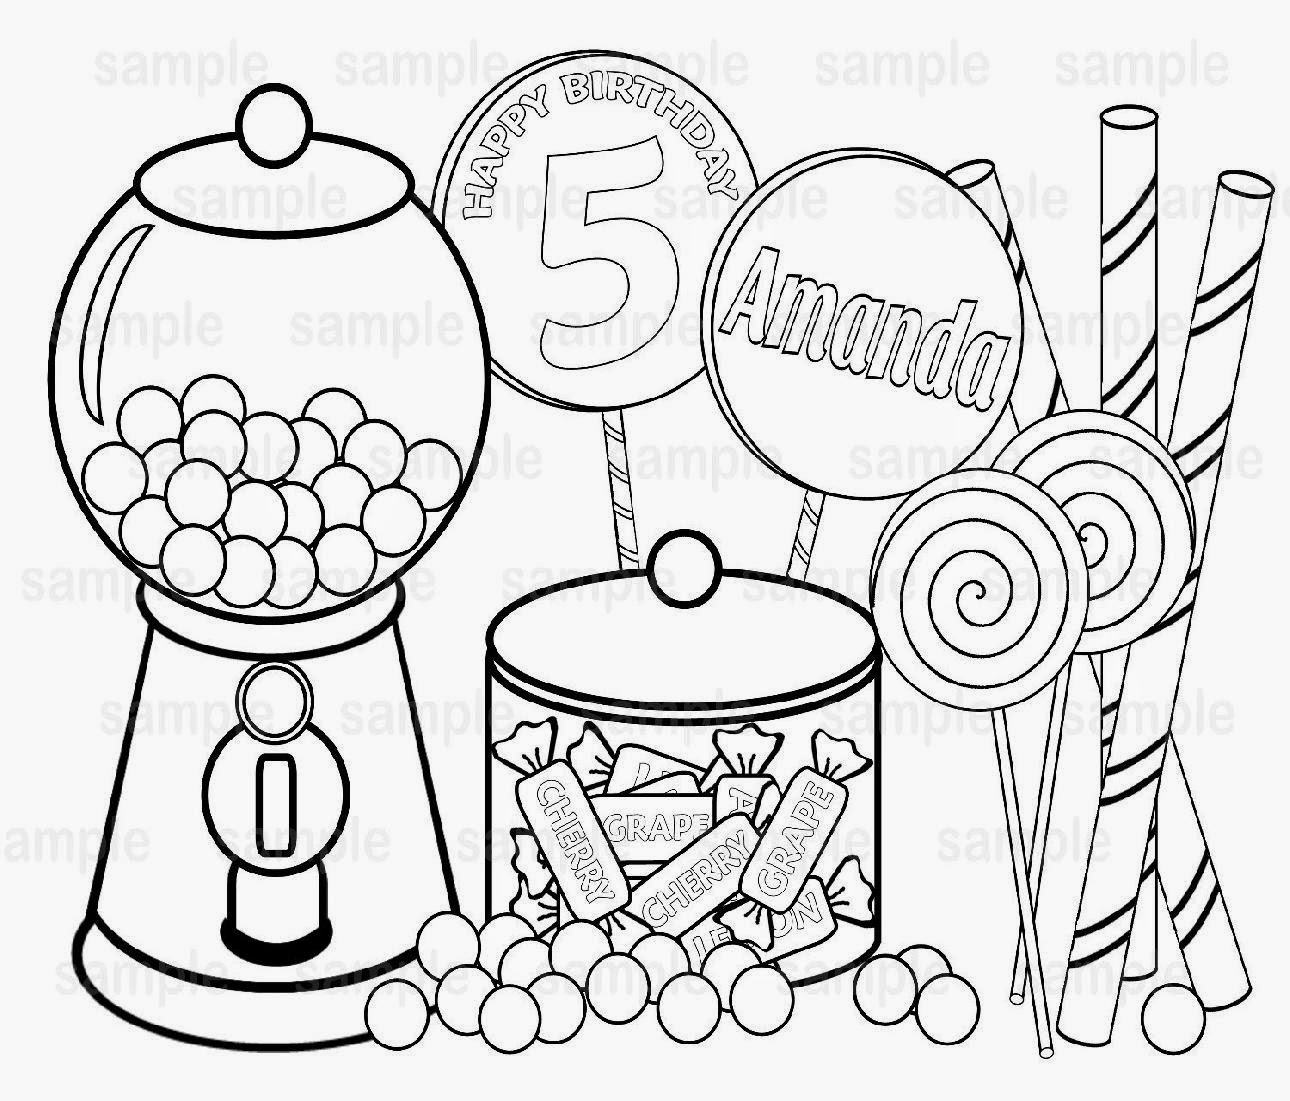 Halloween Candy Coloring Pages at GetColorings.com | Free printable colorings pages to print and ...